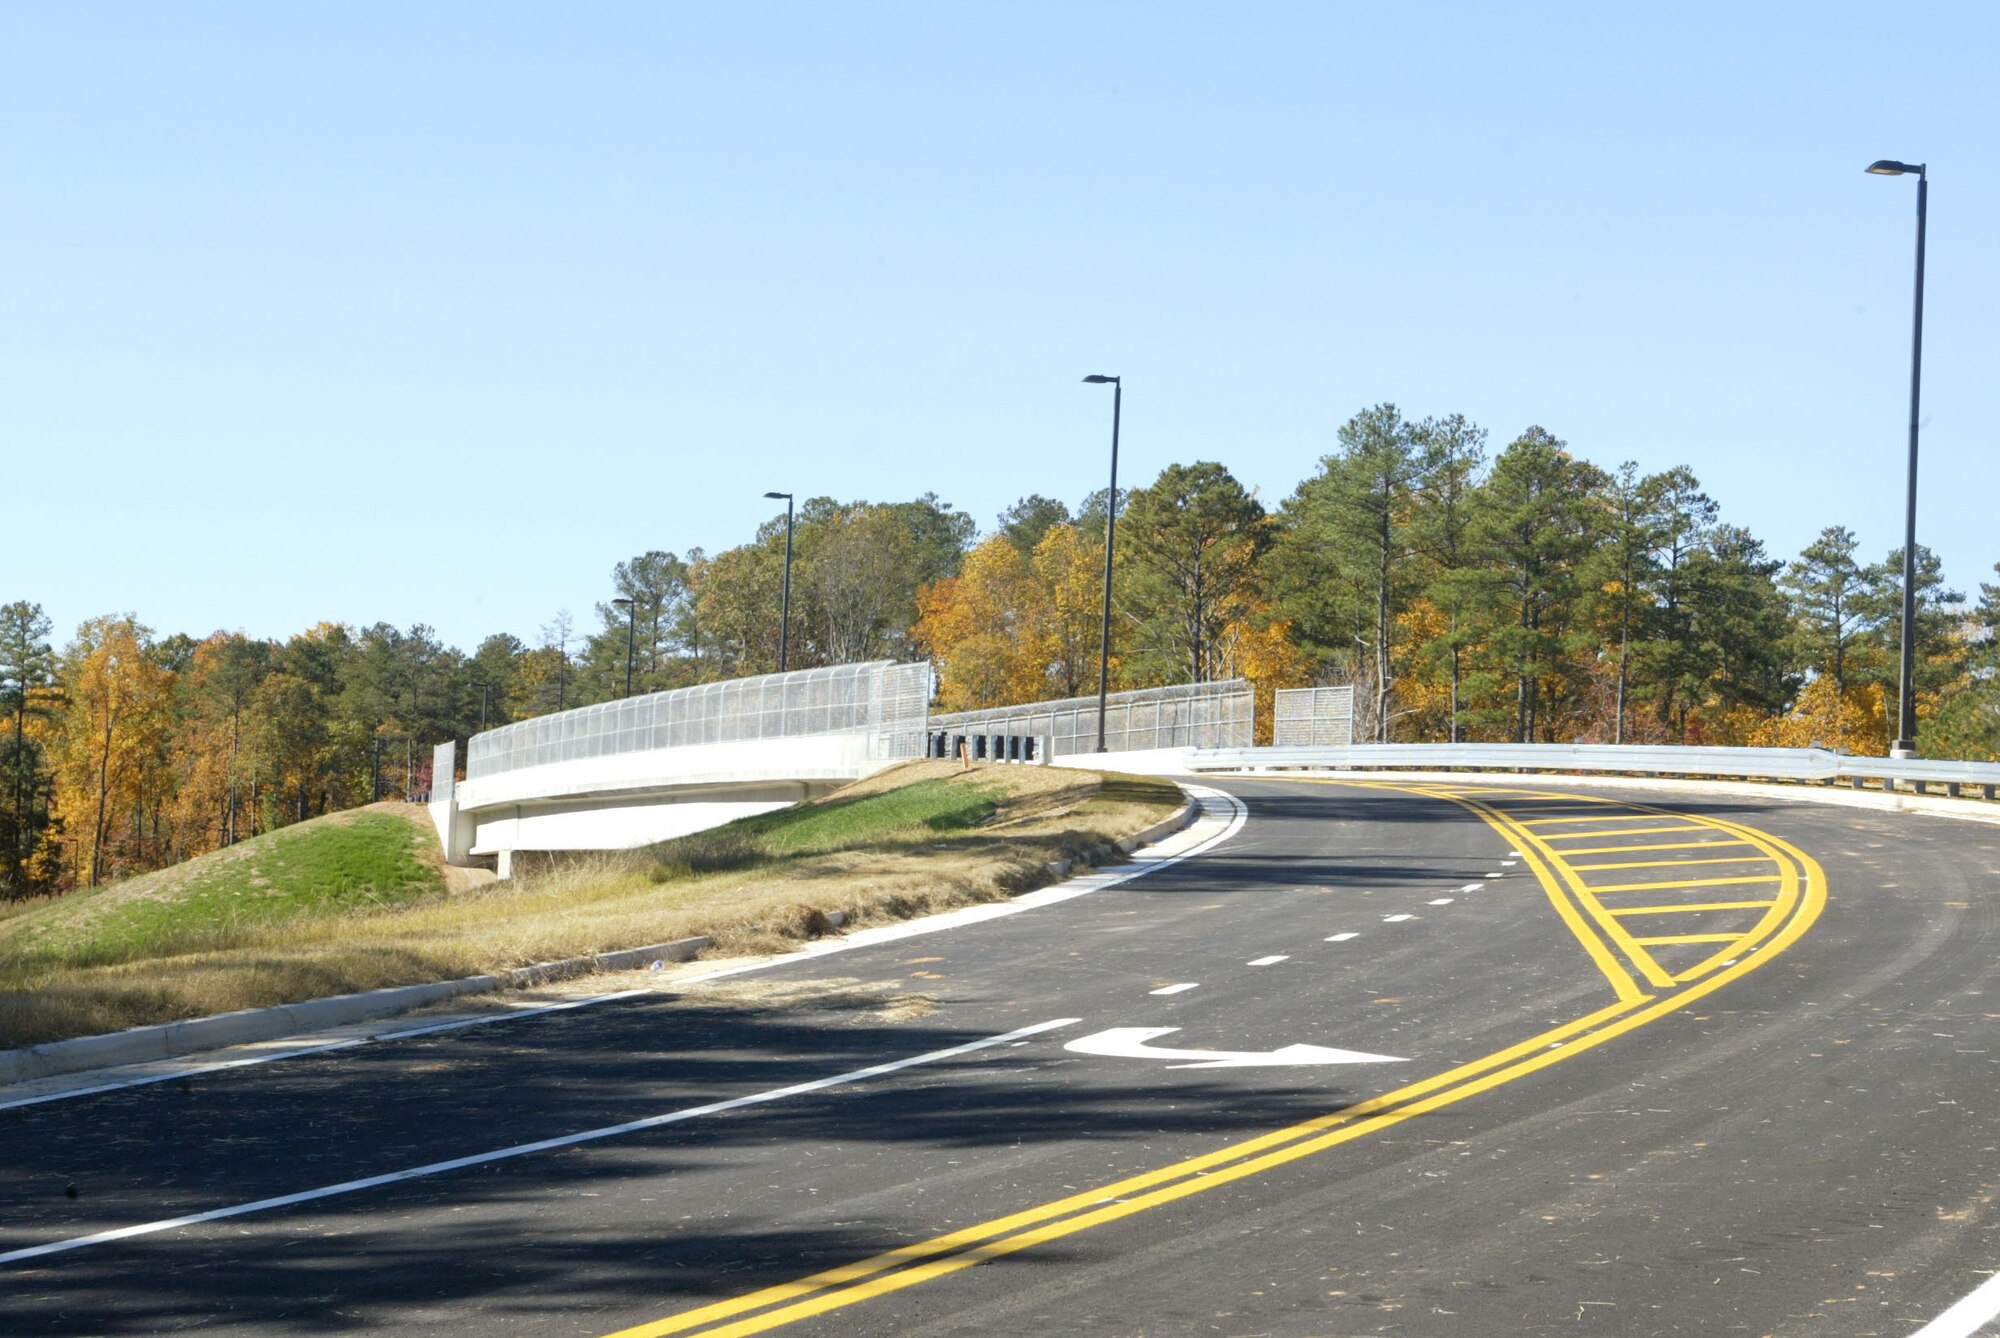 The planning and building of the 6,000 foot bridge took two years from start to finish. Construction started with a simple clearing of the land to its completed stage of 4,860 feet of sidewalk and its 220 feet long 40 feet wide massive overpass at completion. The bridge which crosses over South Cobb Drive will cut down on some of the traffic problems at the main gate of Dobbins ARB.